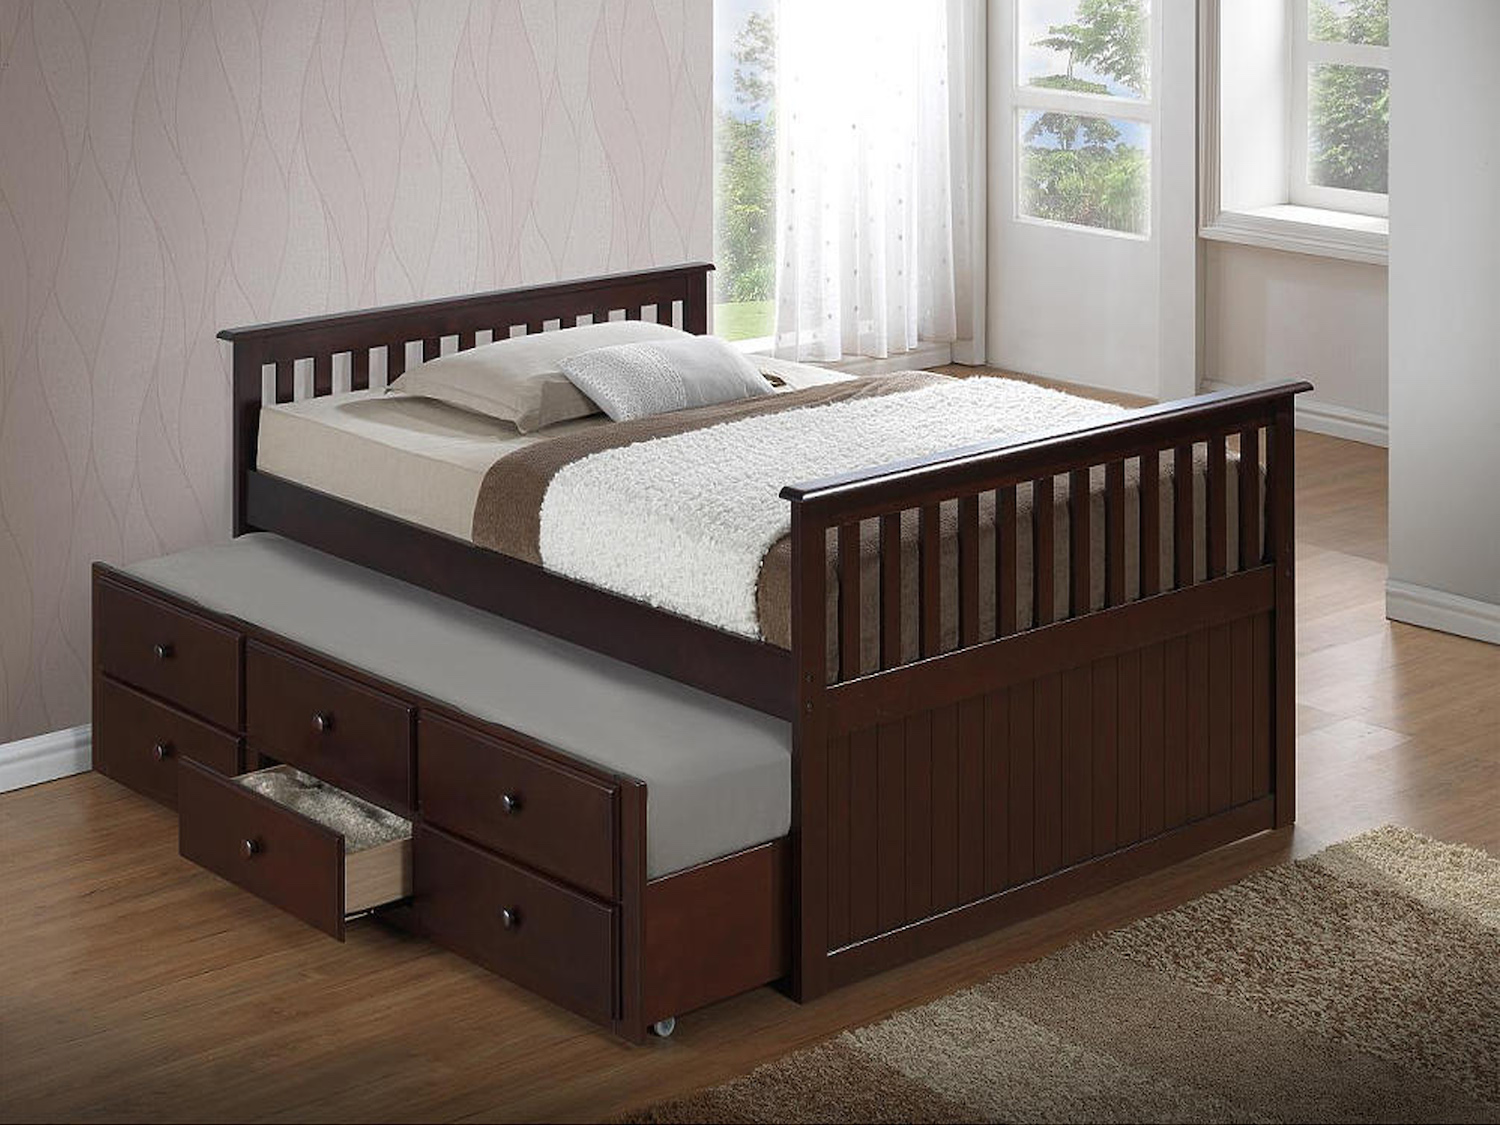 6.5 trundle bed mattress